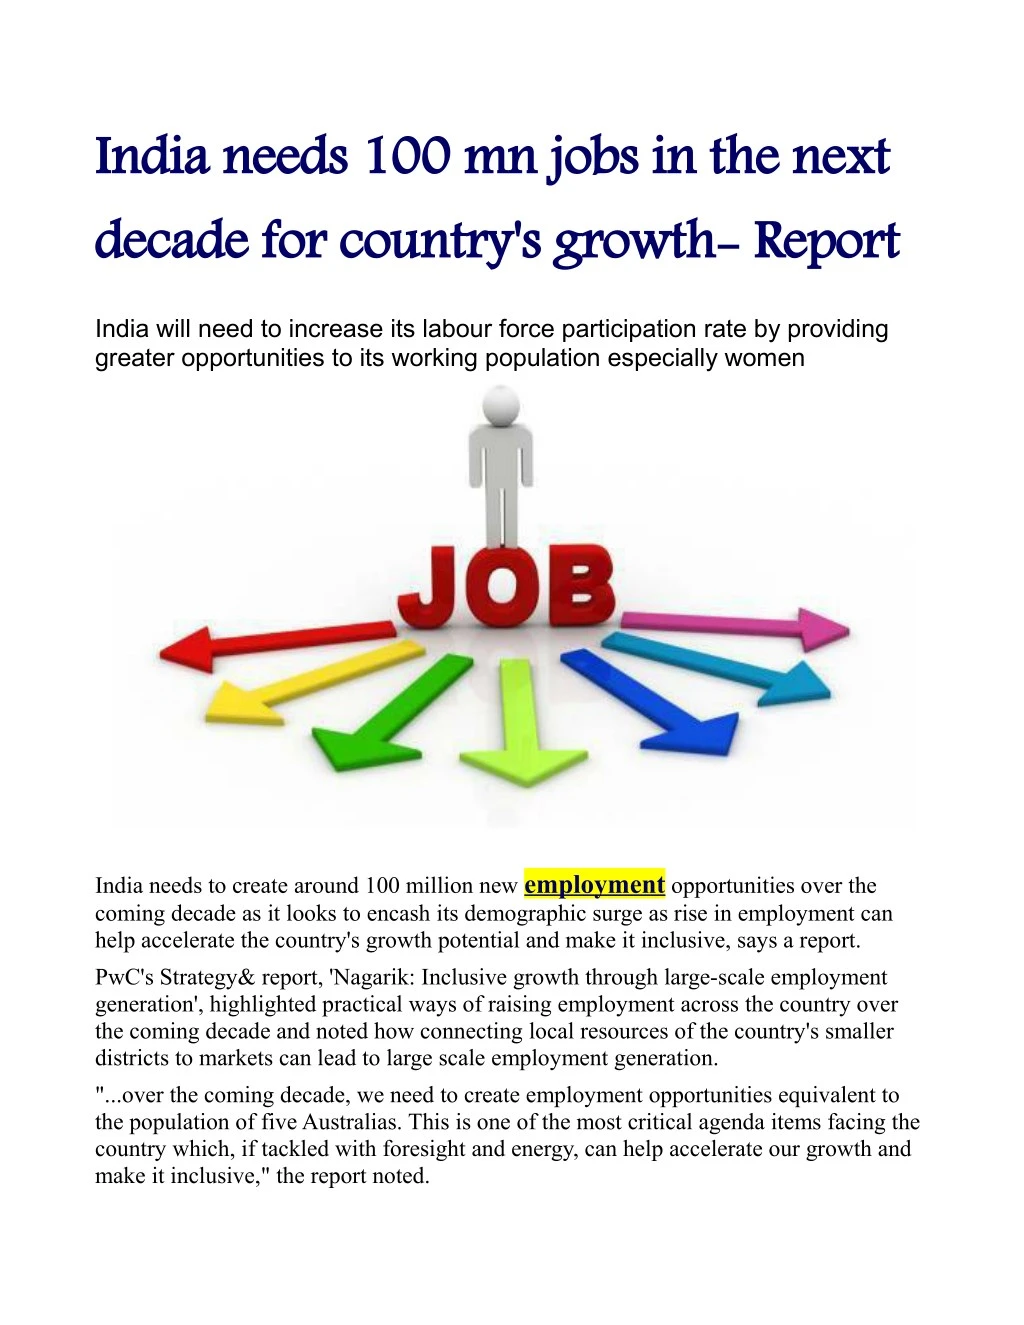 india needs 100 mn jobs in the next decade